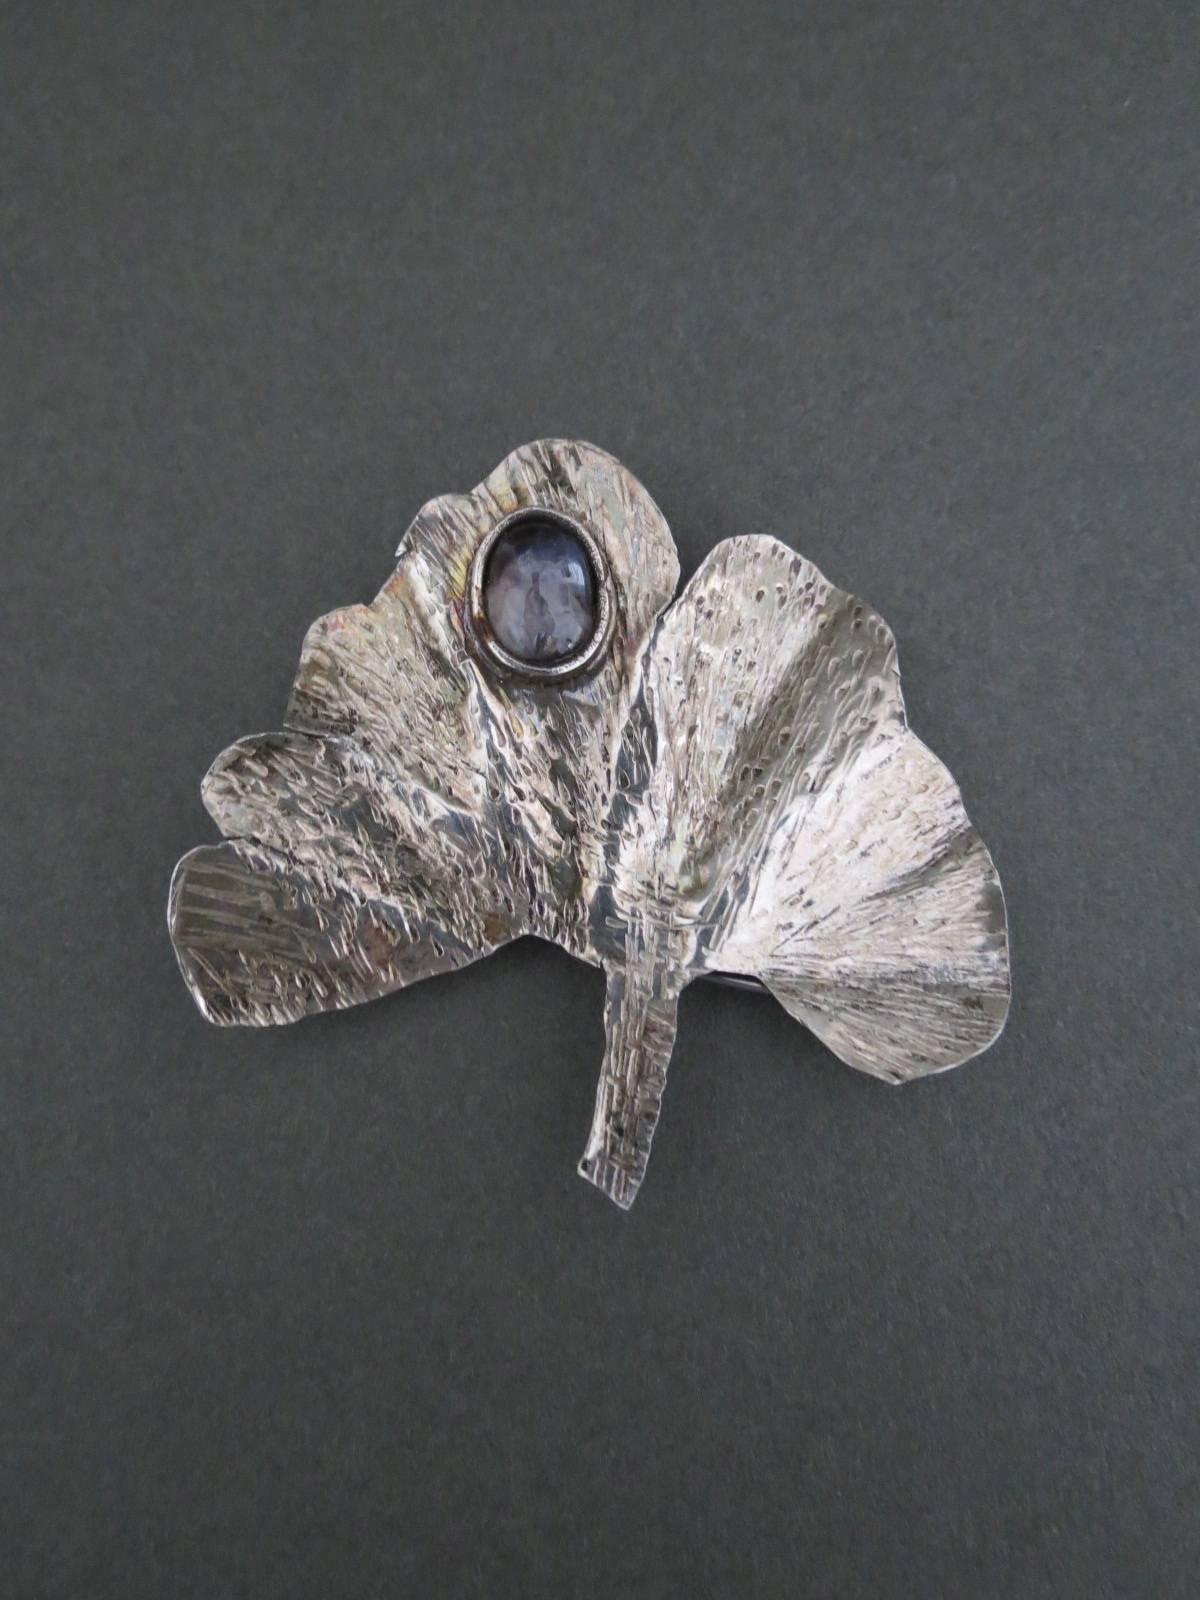 Amazing Vintage Sterling Silver Amethyst Danish Brooch. Lovely Leaf Shape with Natural Amethyst stone. The item is not hallmarked but tested .
Item Specifics
Height: 5.6cm (approx 2.00